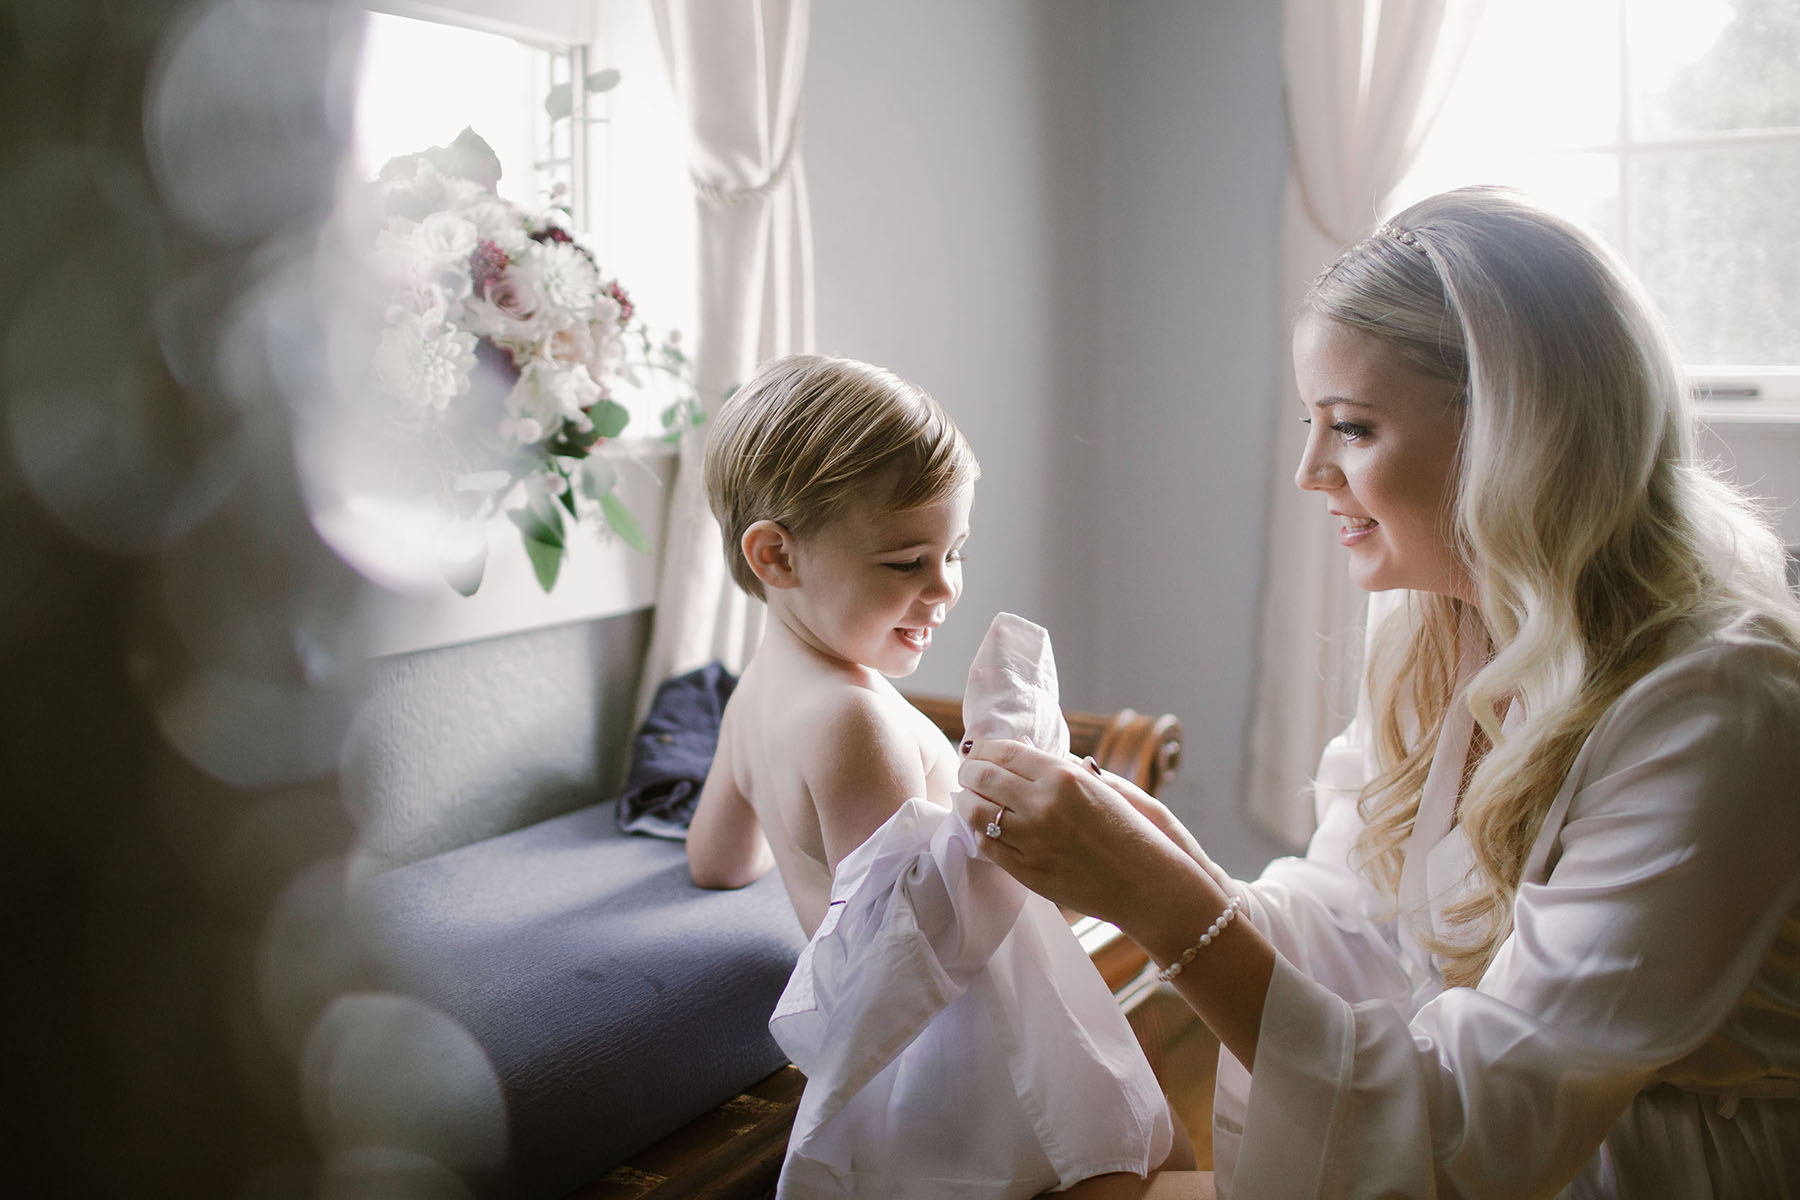 A blond woman helps a small child get a formal shirt on in a brightly lit light room in a Sarah Gormley photo